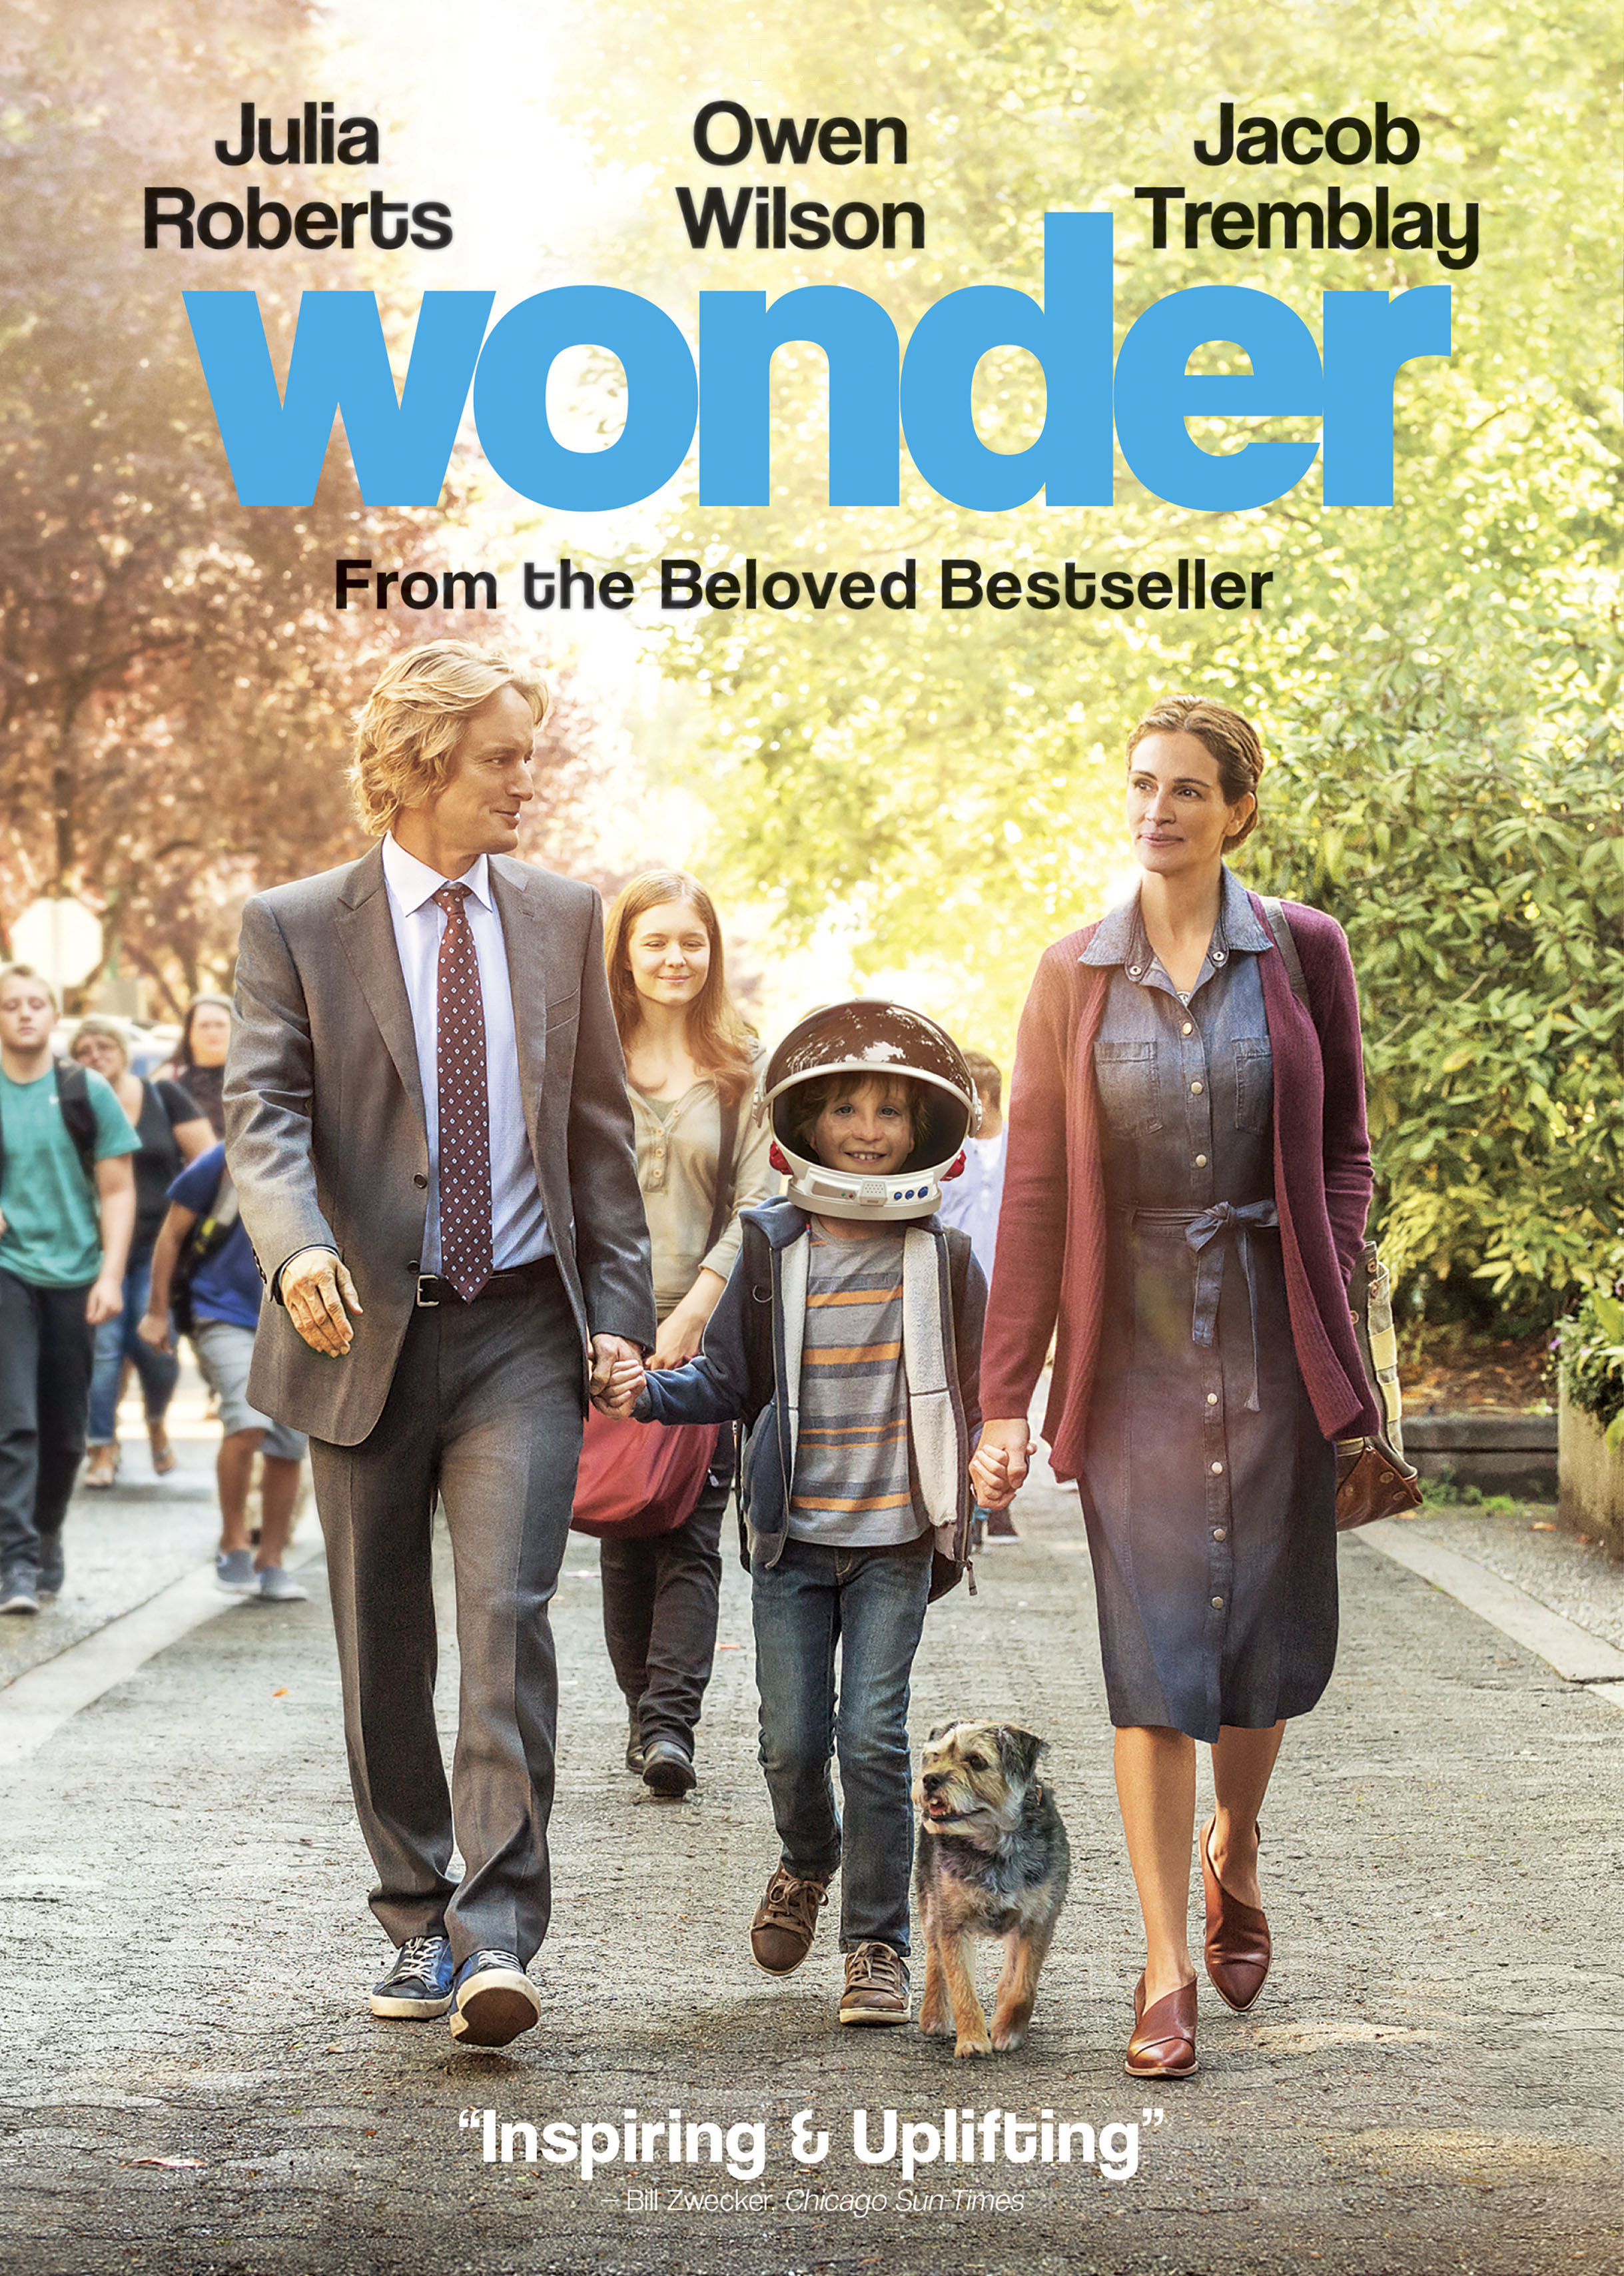 cast to the wonder